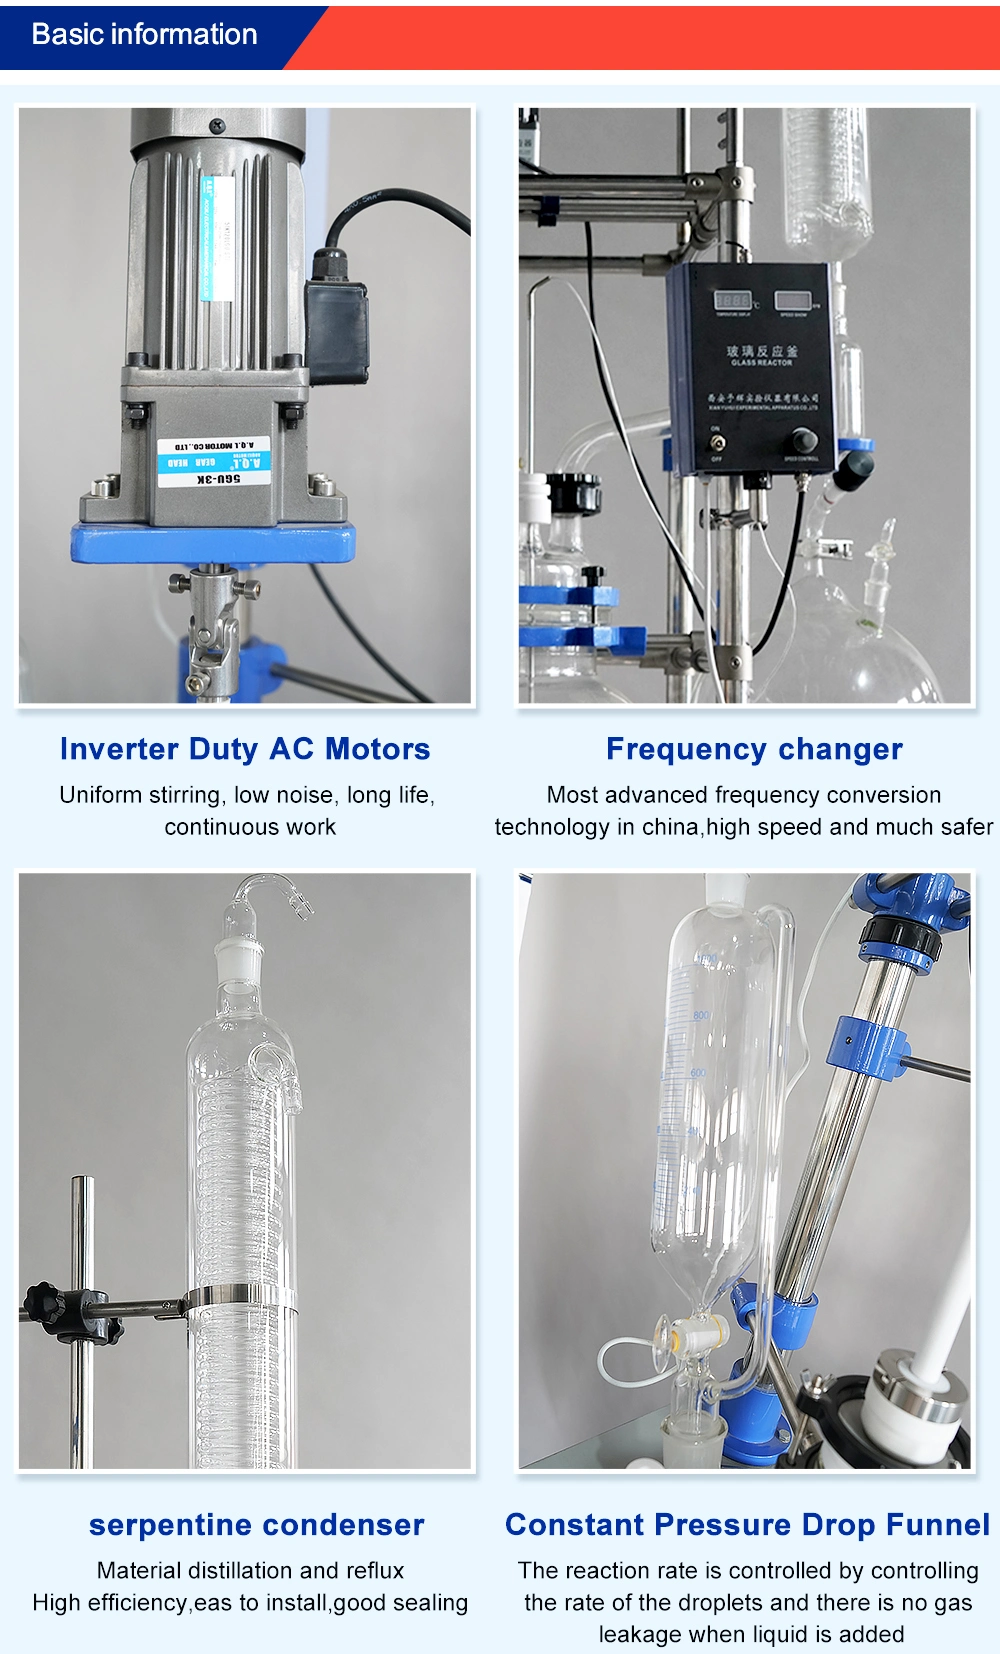 S-H Biotech 1-200L Lab Jacketed Reactor for Sale Lab Double Glass Reactor with Continous Stirring Photochemical Reactor